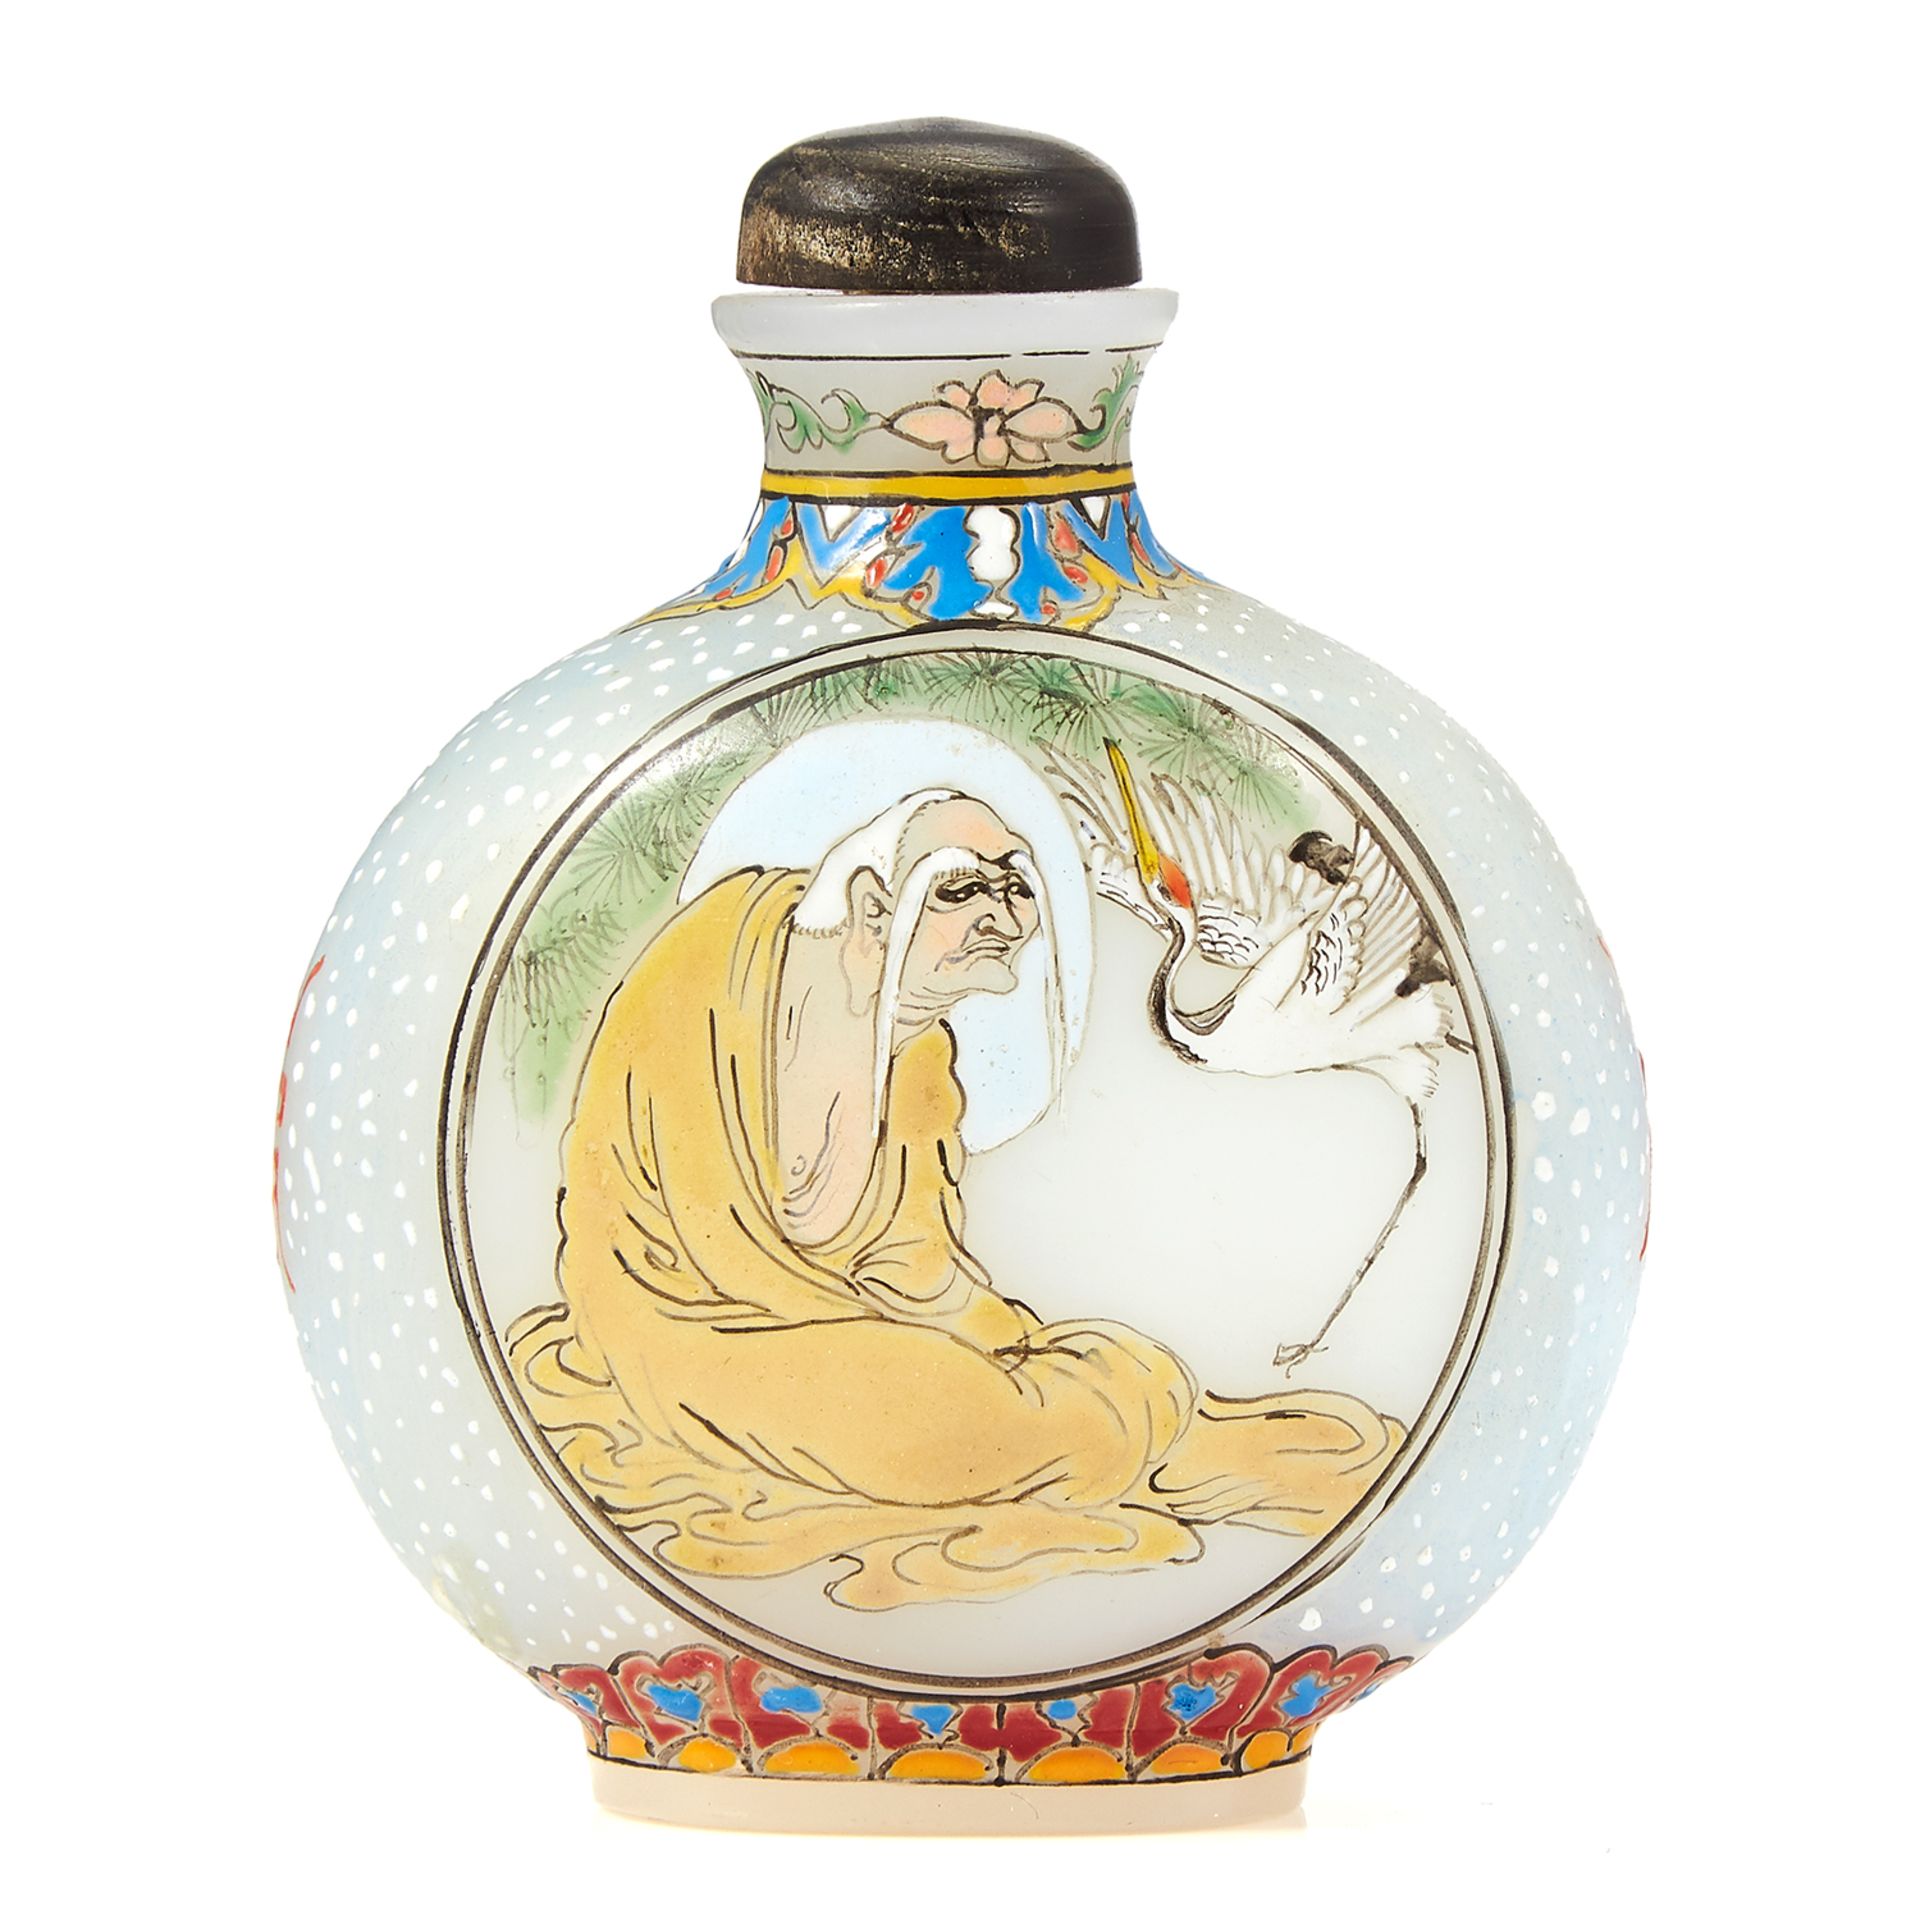 A VINTAGE CHINESE PAINTED GLASS SNUFF BOTTLE with scenes depicting elderly gentleman and animals,